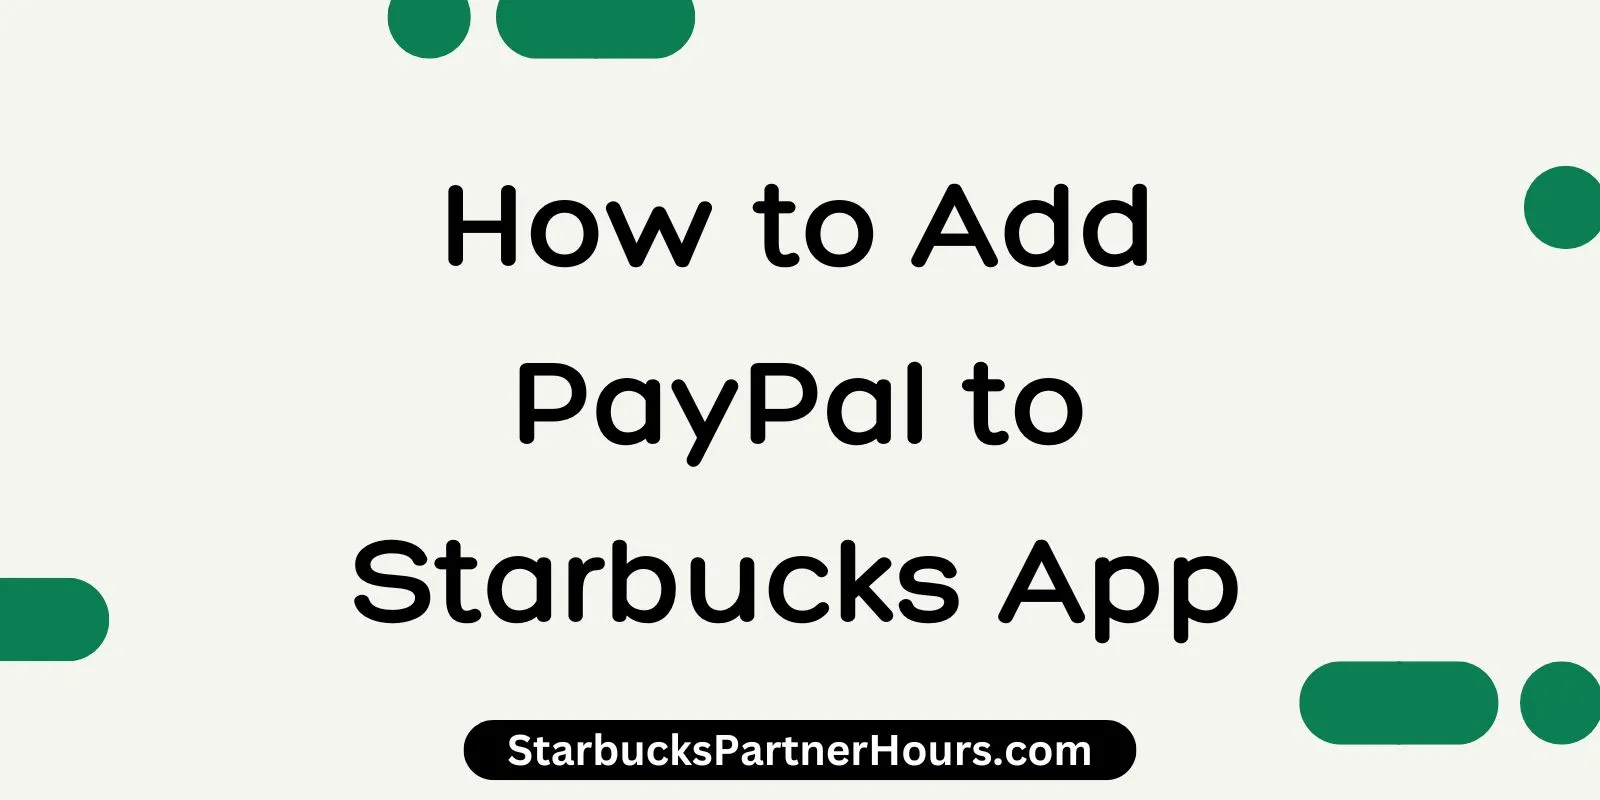 How to Add PayPal to Starbucks App